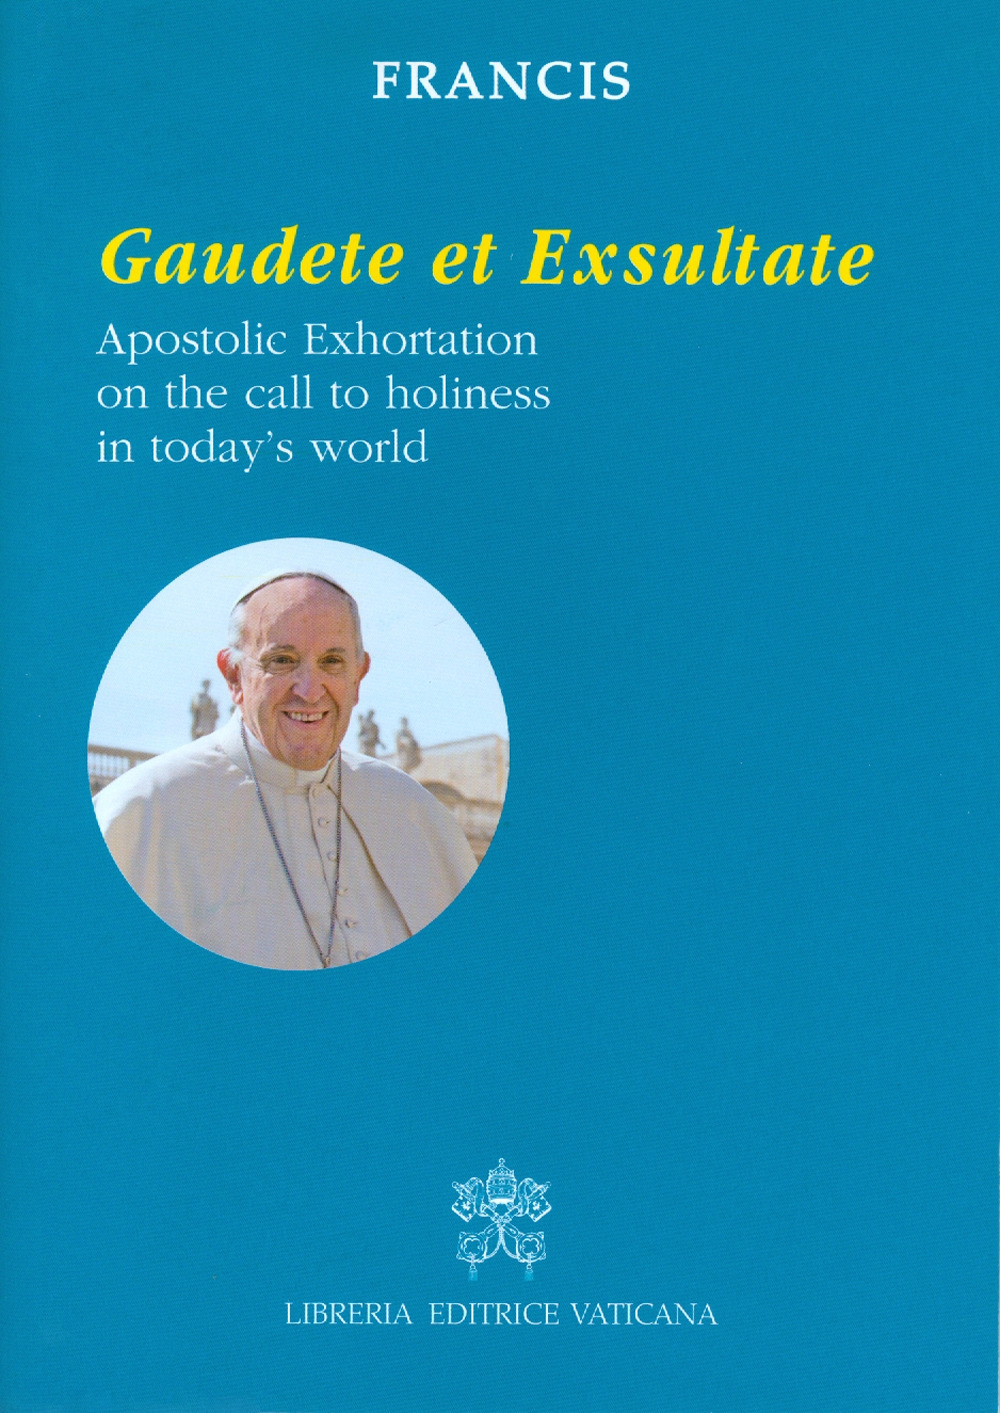 Gaudete et exsultate. Apostolic exhortation on the call to holiness in today's world